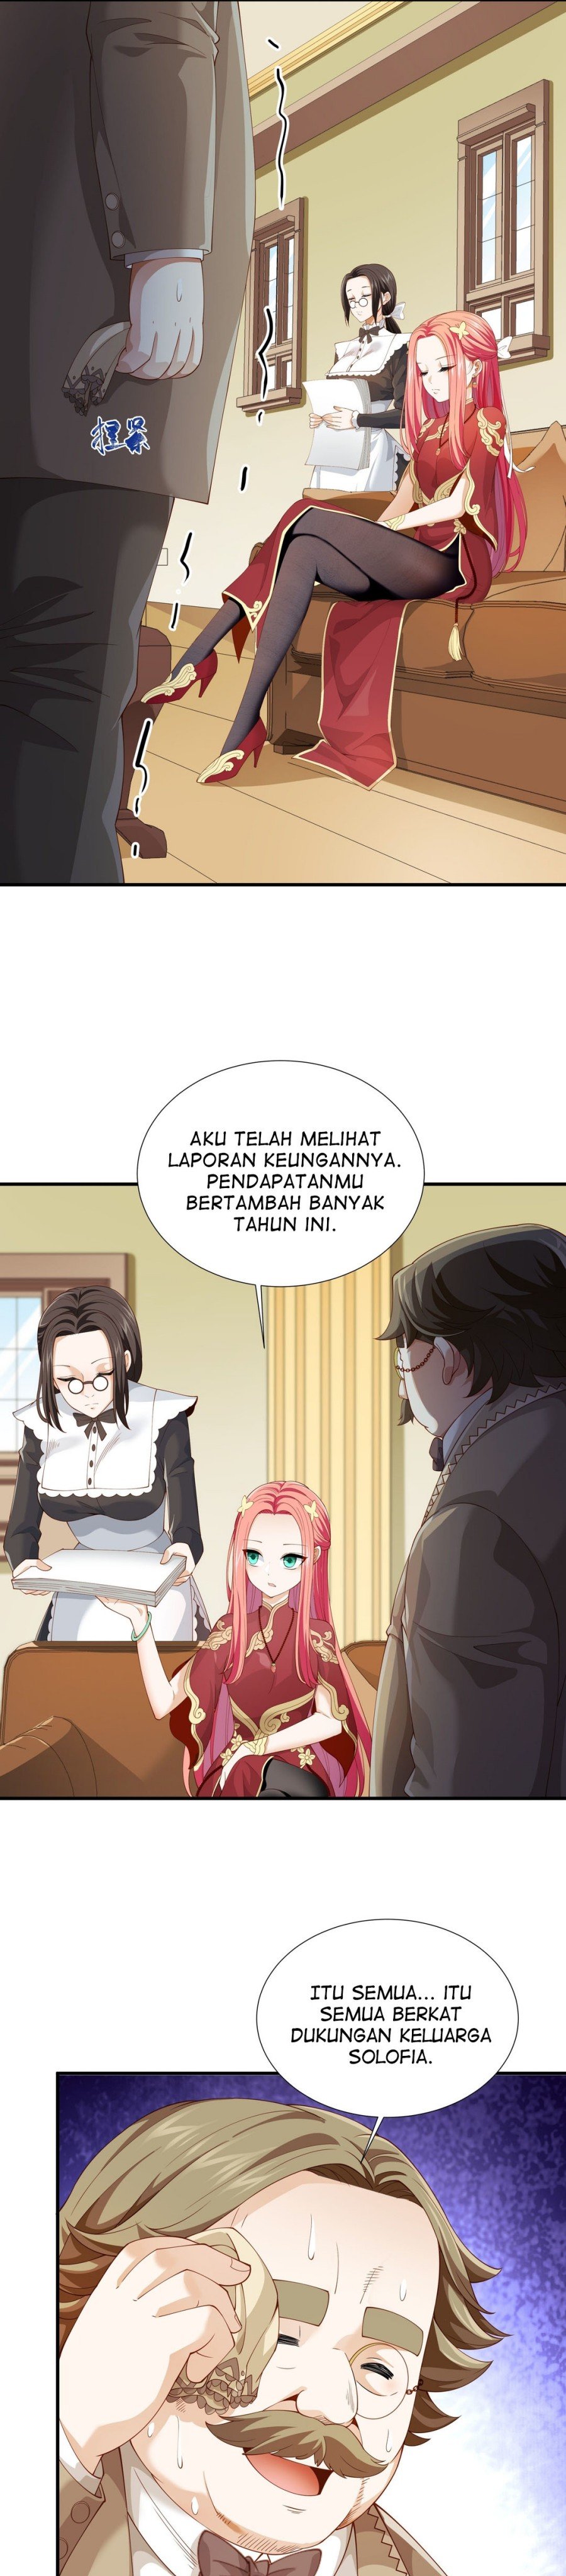 Dilarang COPAS - situs resmi www.mangacanblog.com - Komik little tyrant doesnt want to meet with a bad end 027 - chapter 27 28 Indonesia little tyrant doesnt want to meet with a bad end 027 - chapter 27 Terbaru 13|Baca Manga Komik Indonesia|Mangacan